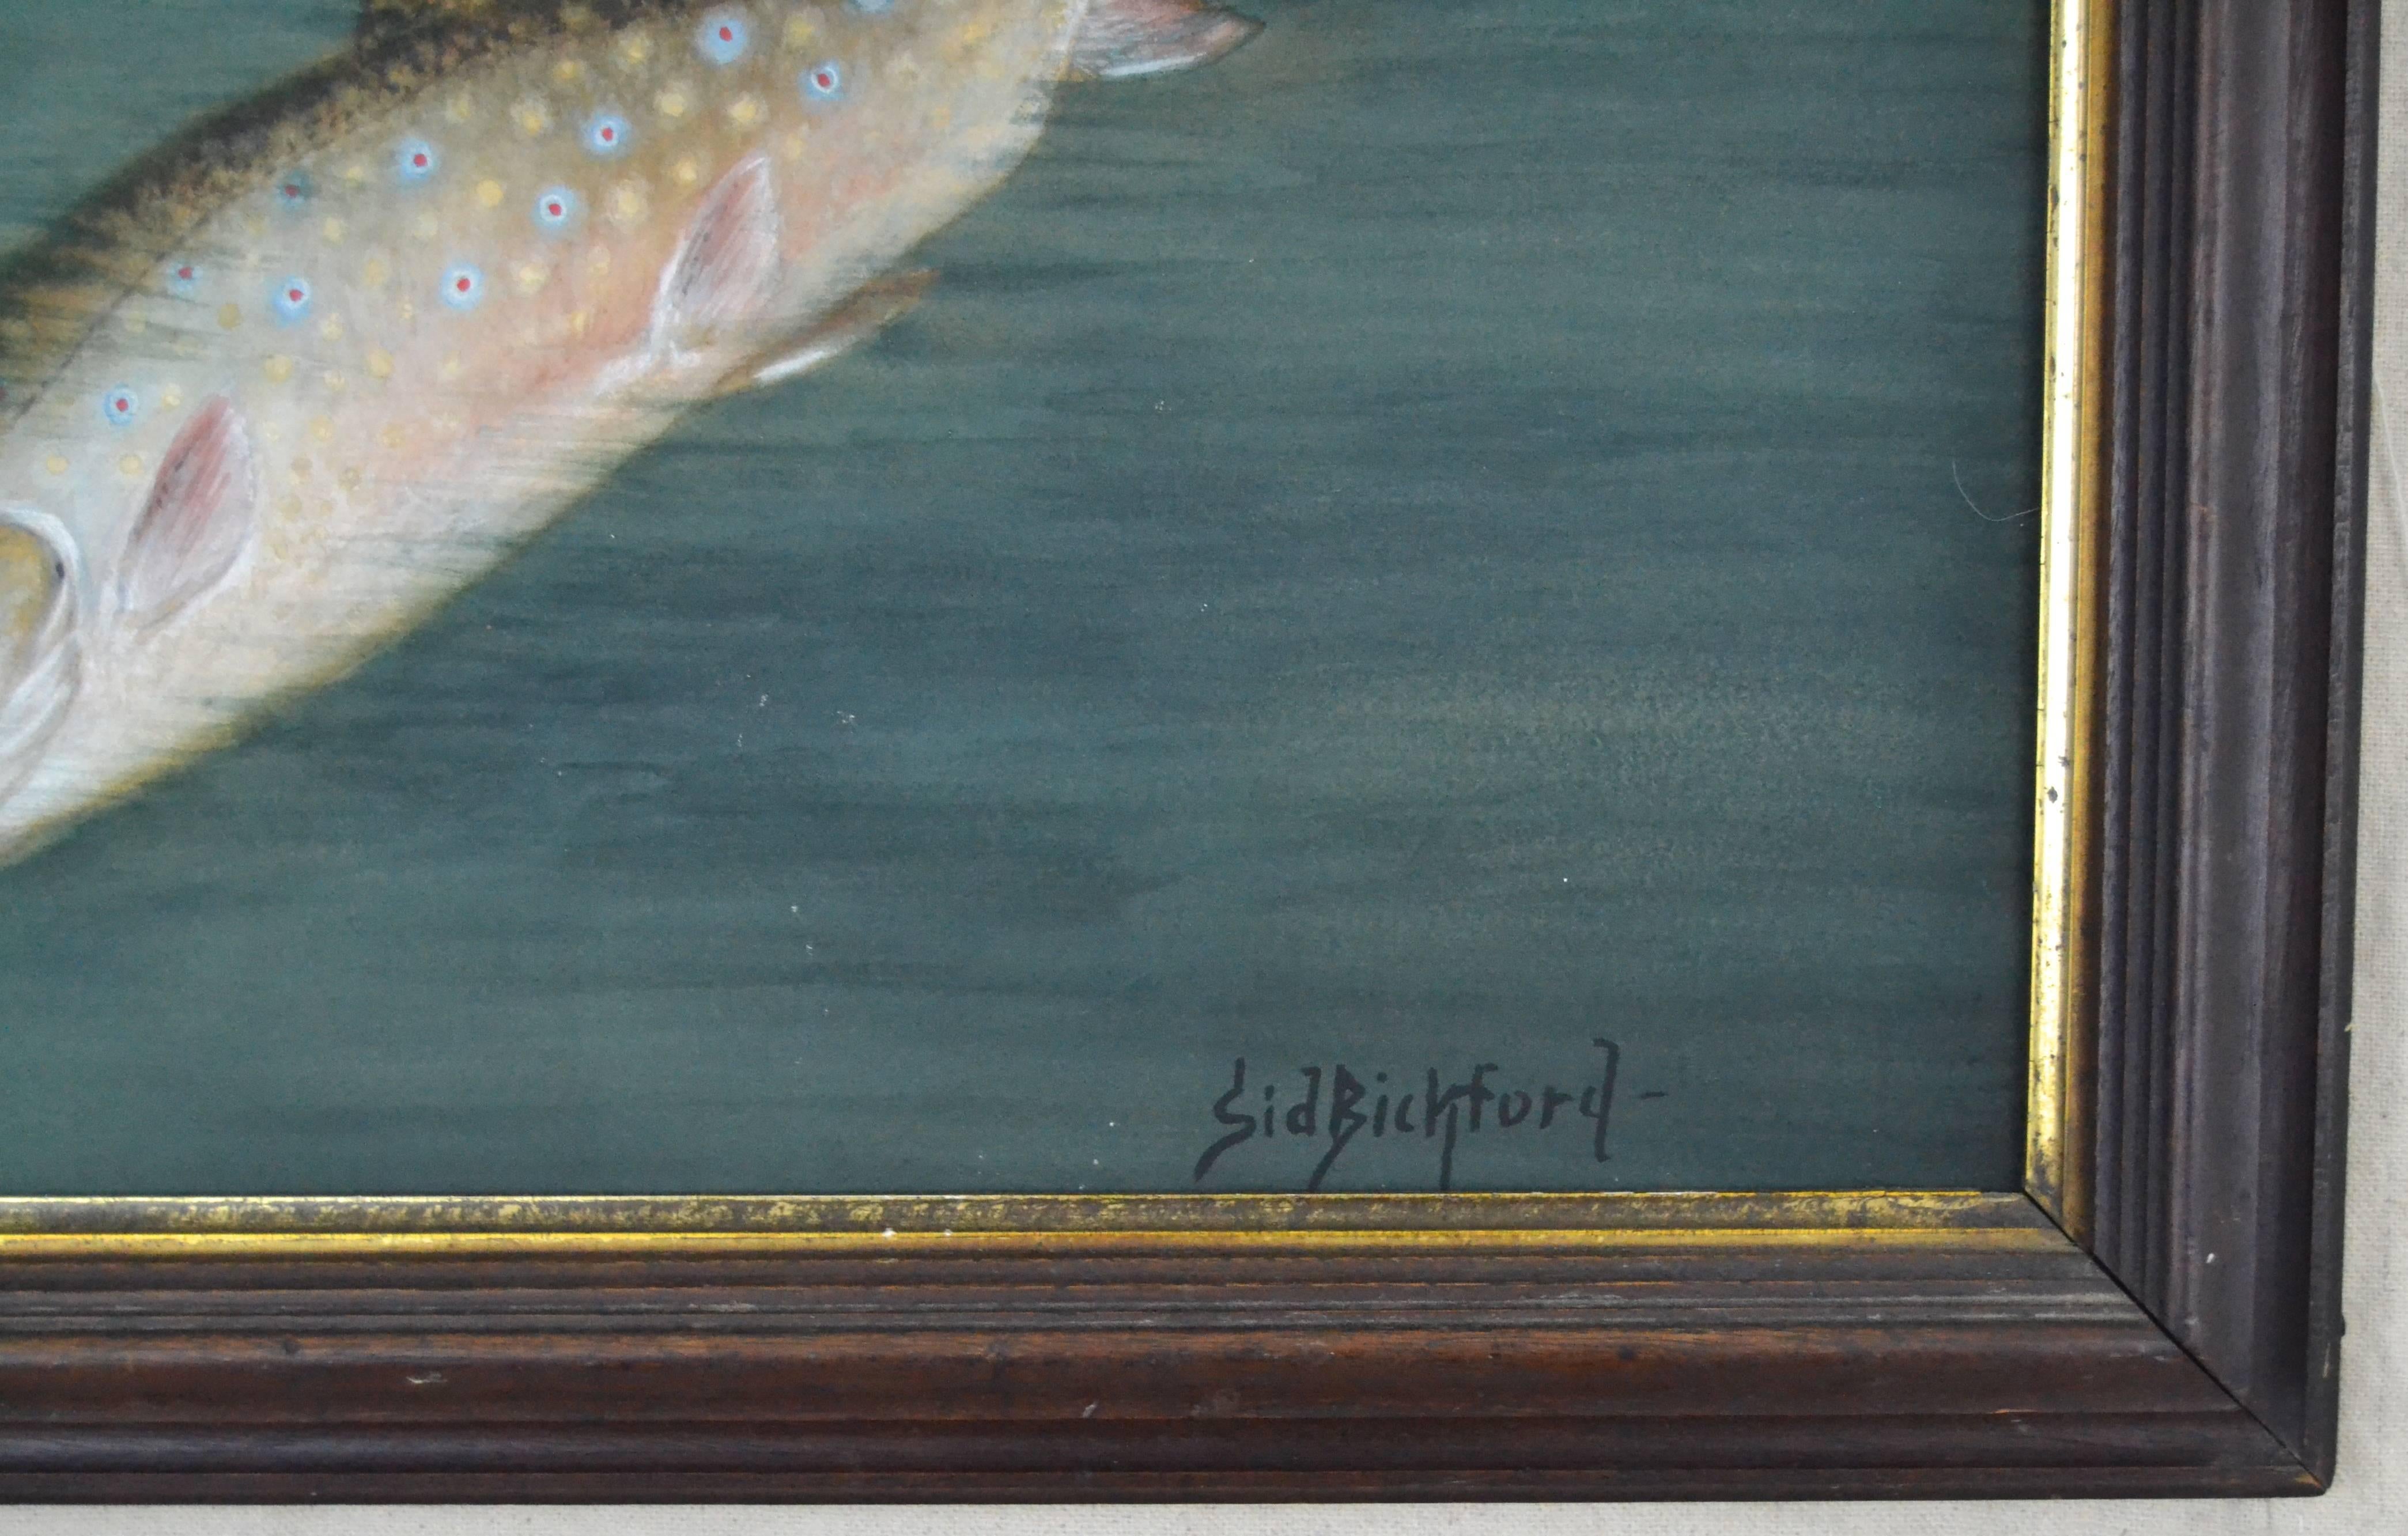 19th Century Brook Trout Painting by Sid Bickford